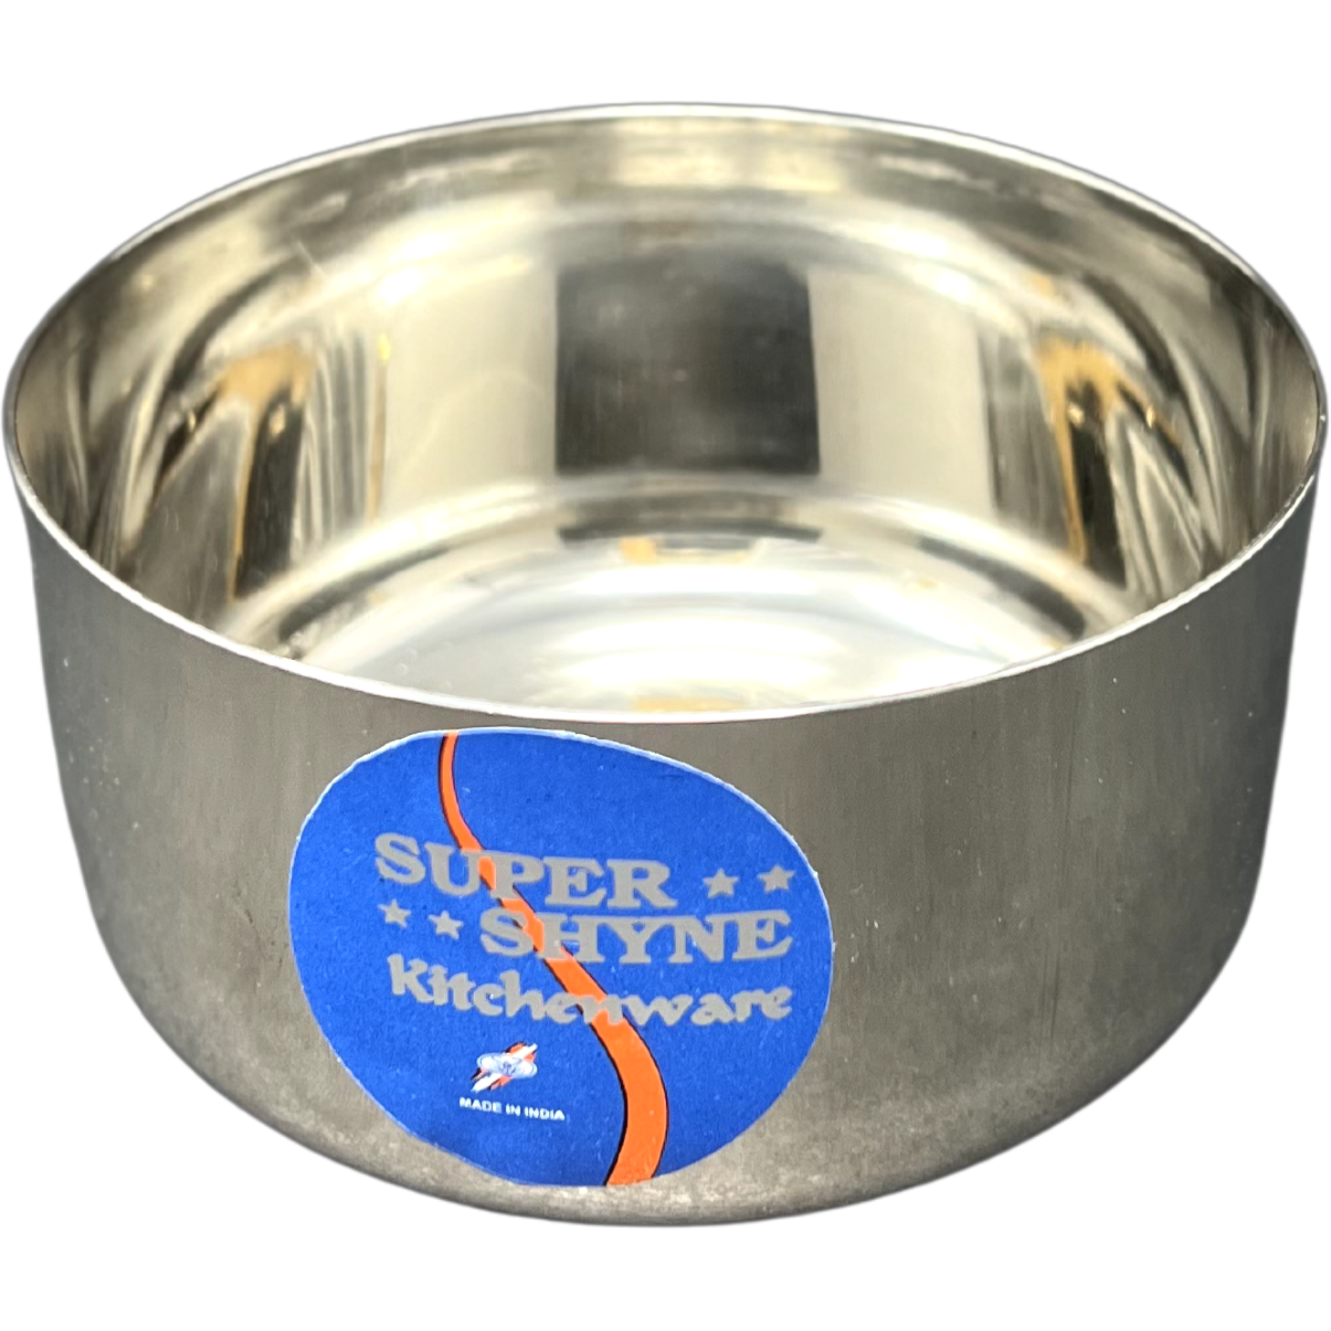 Super Shyne Stainless Steel Bowl Oval